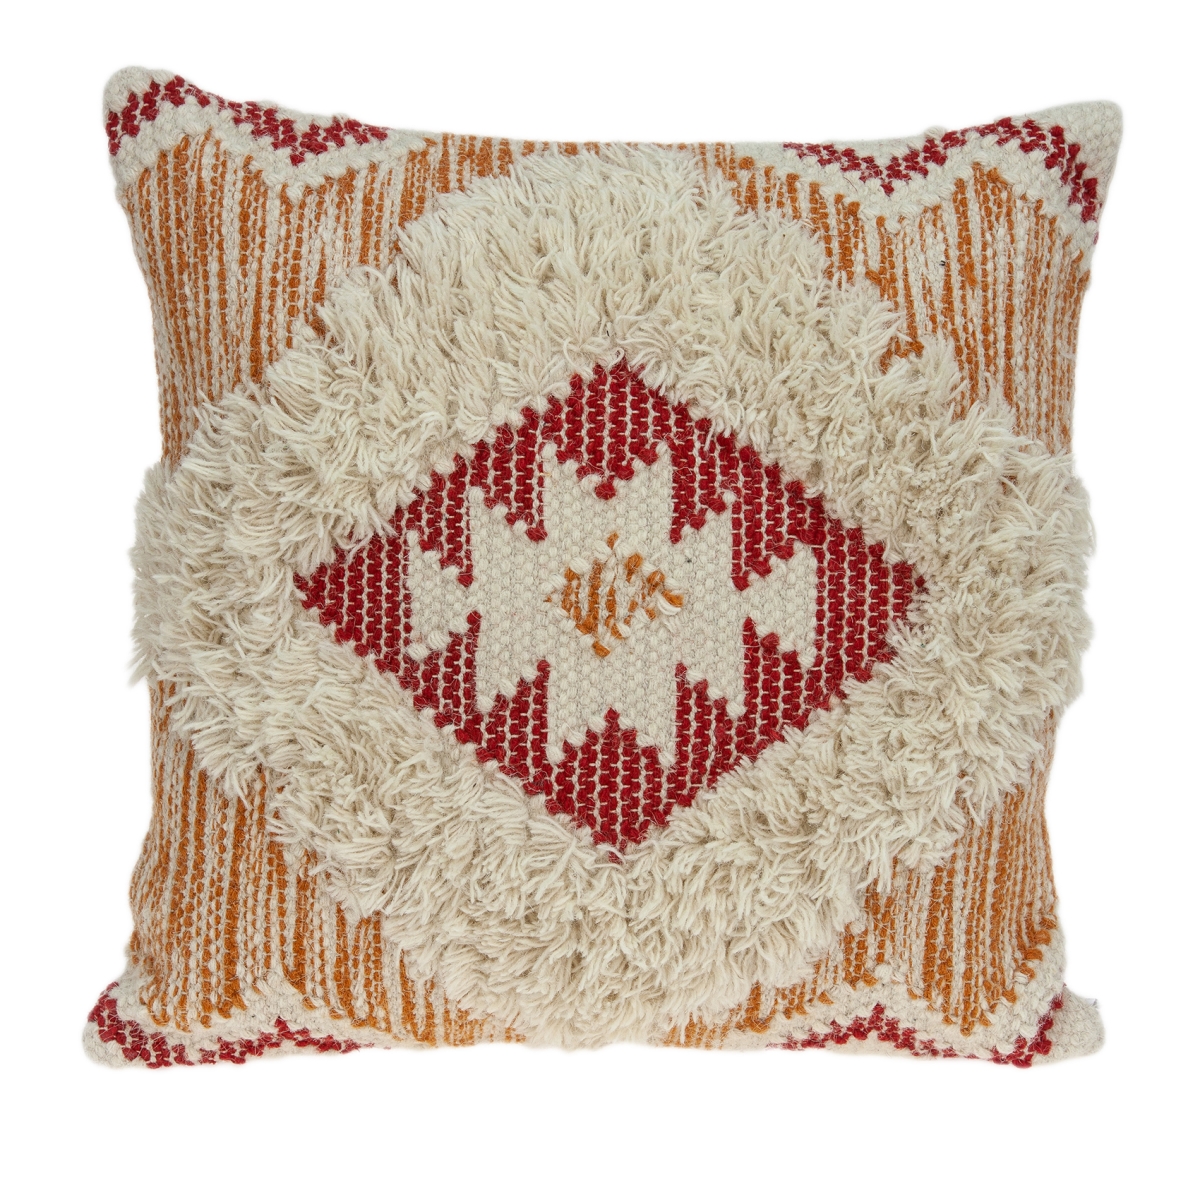 Pild11129d Zara Beige, Orange & Red Square Bohemian Pillow Cover With Down Insert - 20 X 20 X 7 In.